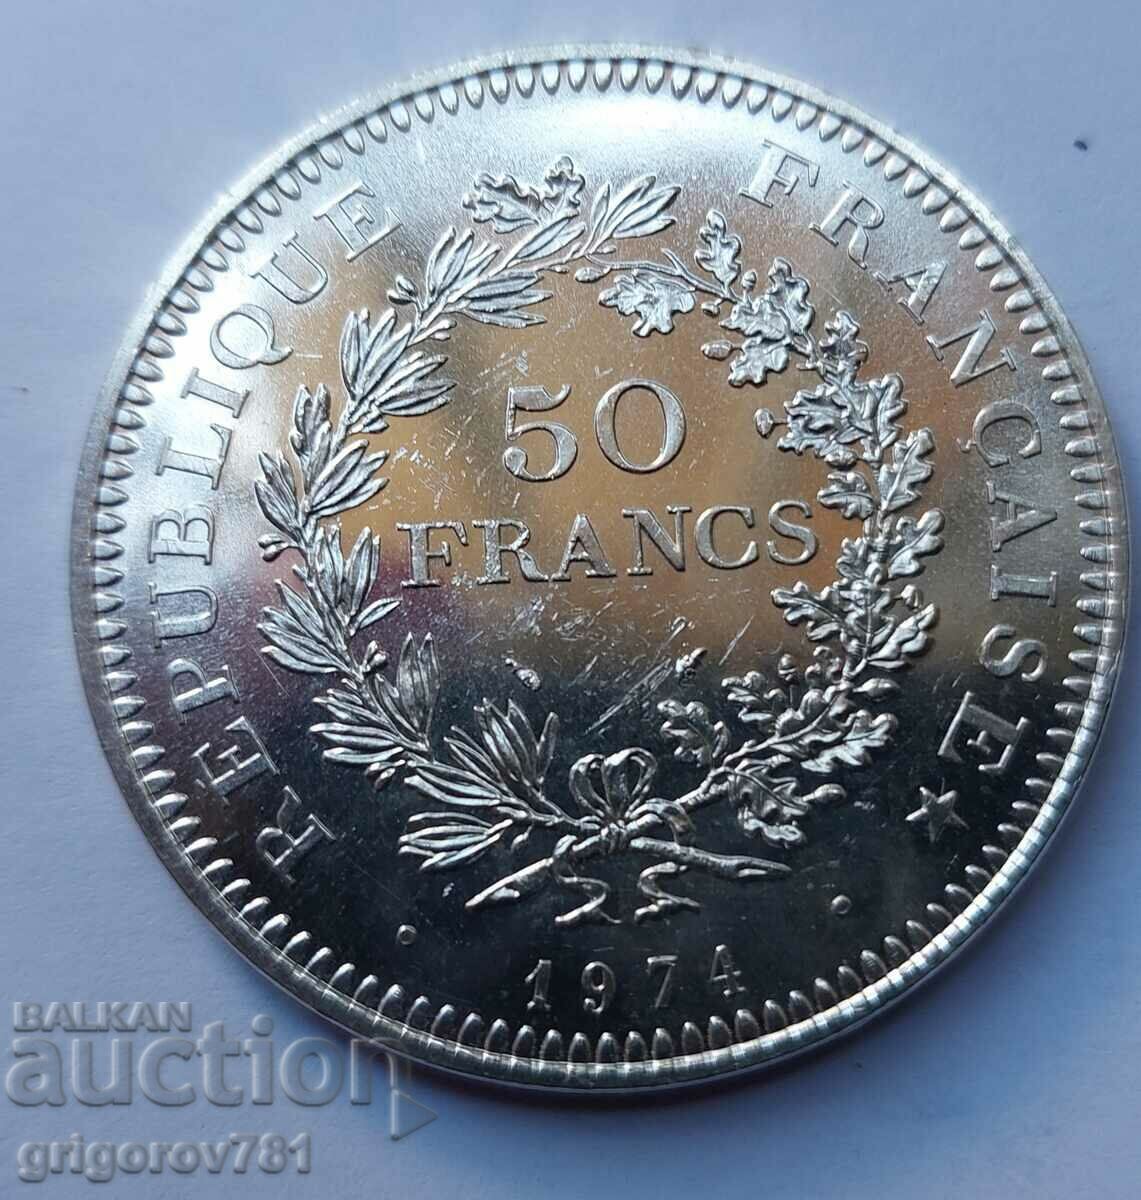 50 Francs Silver France 1974 - Silver Coin #25